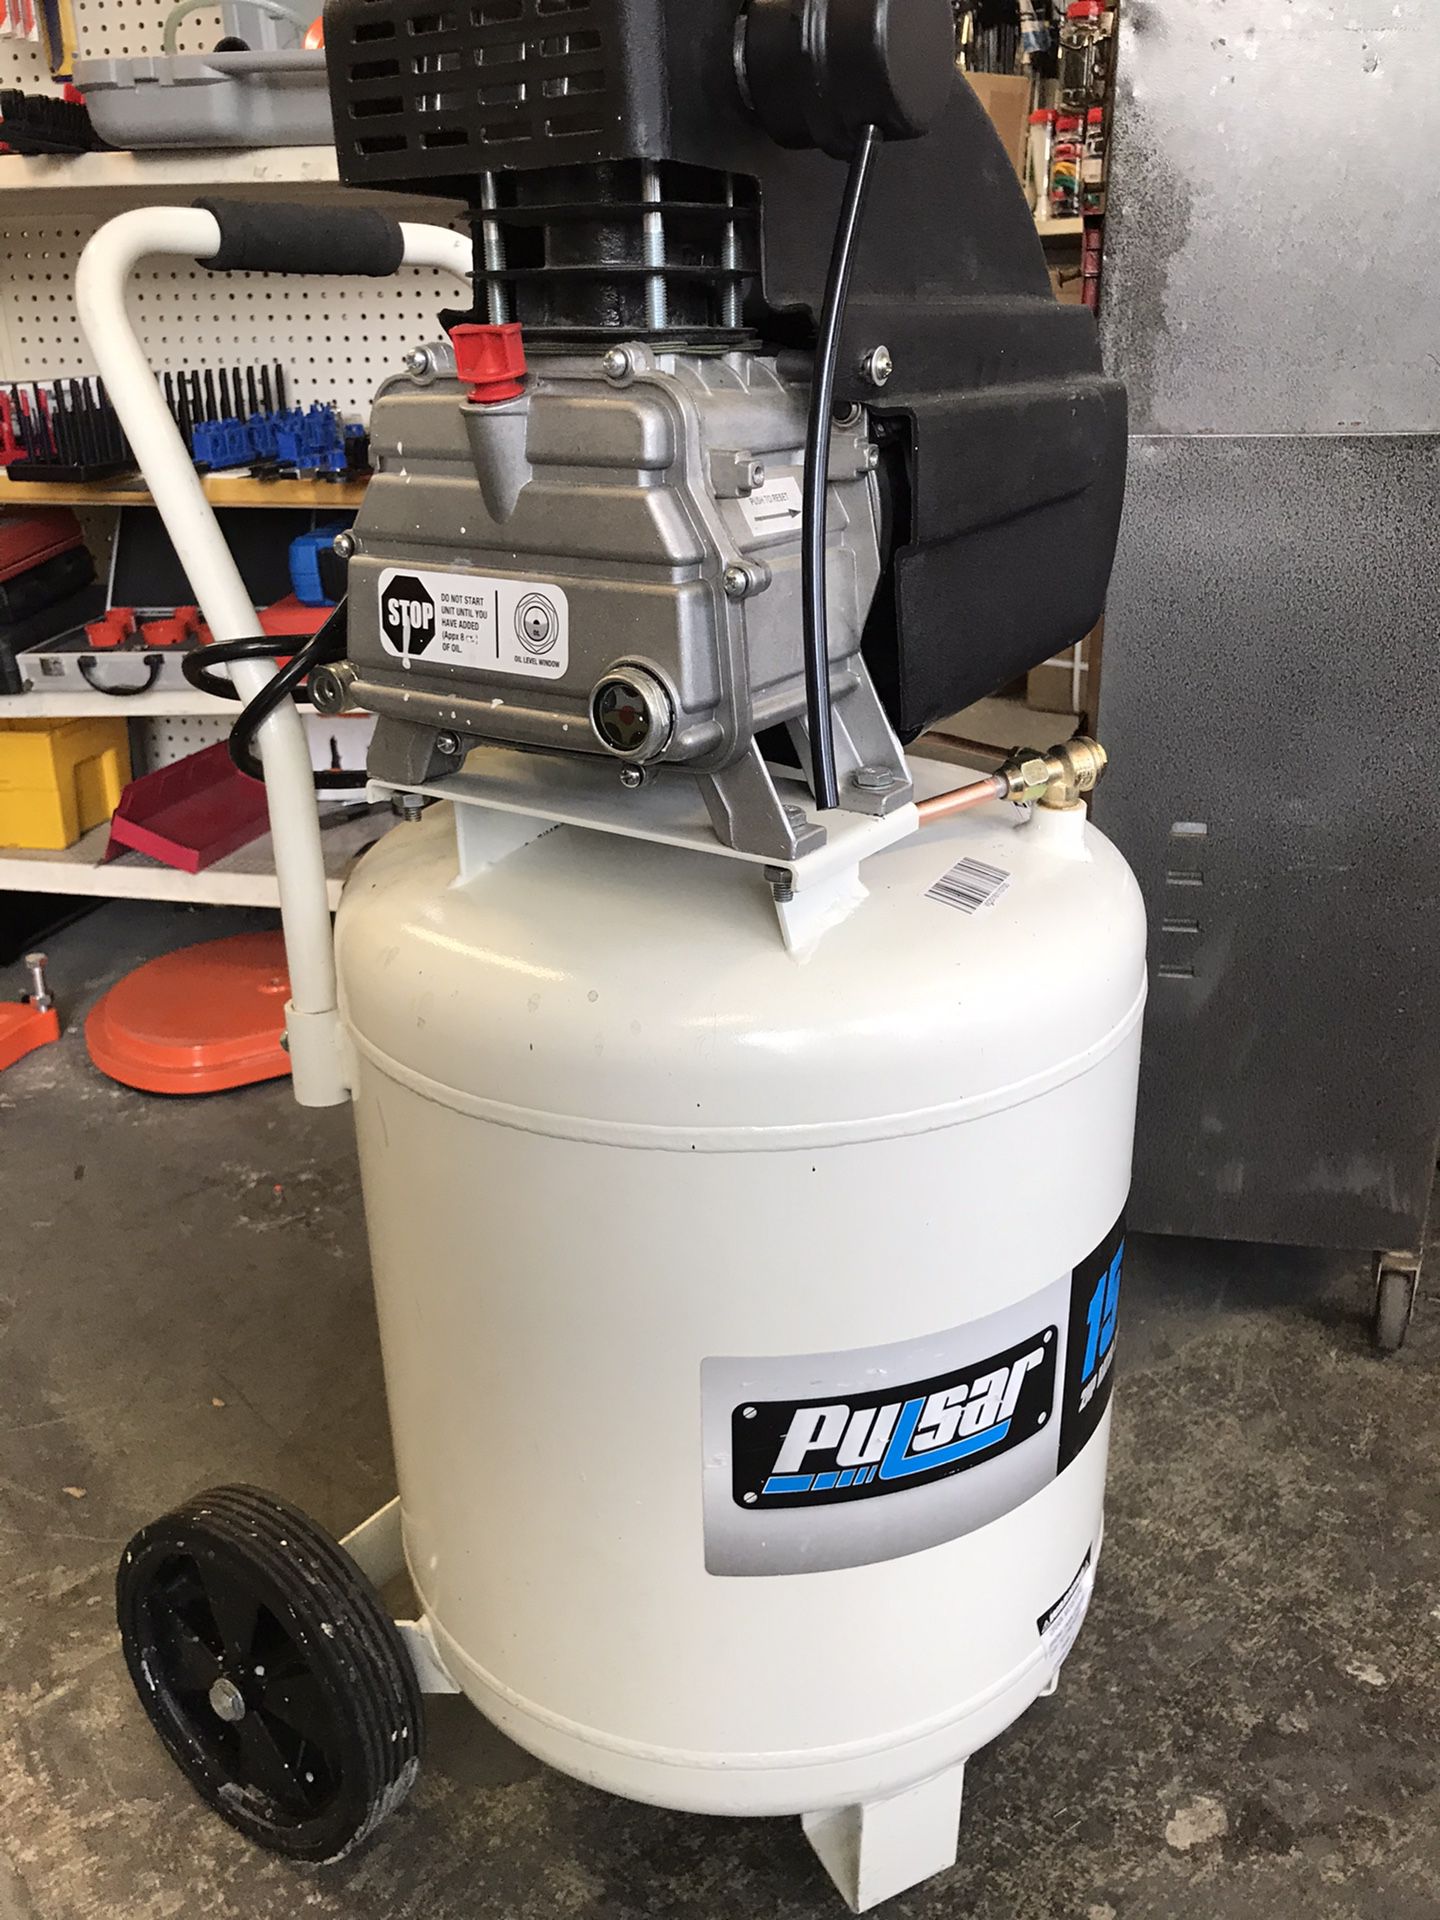 Compressor 15 gallons for $139